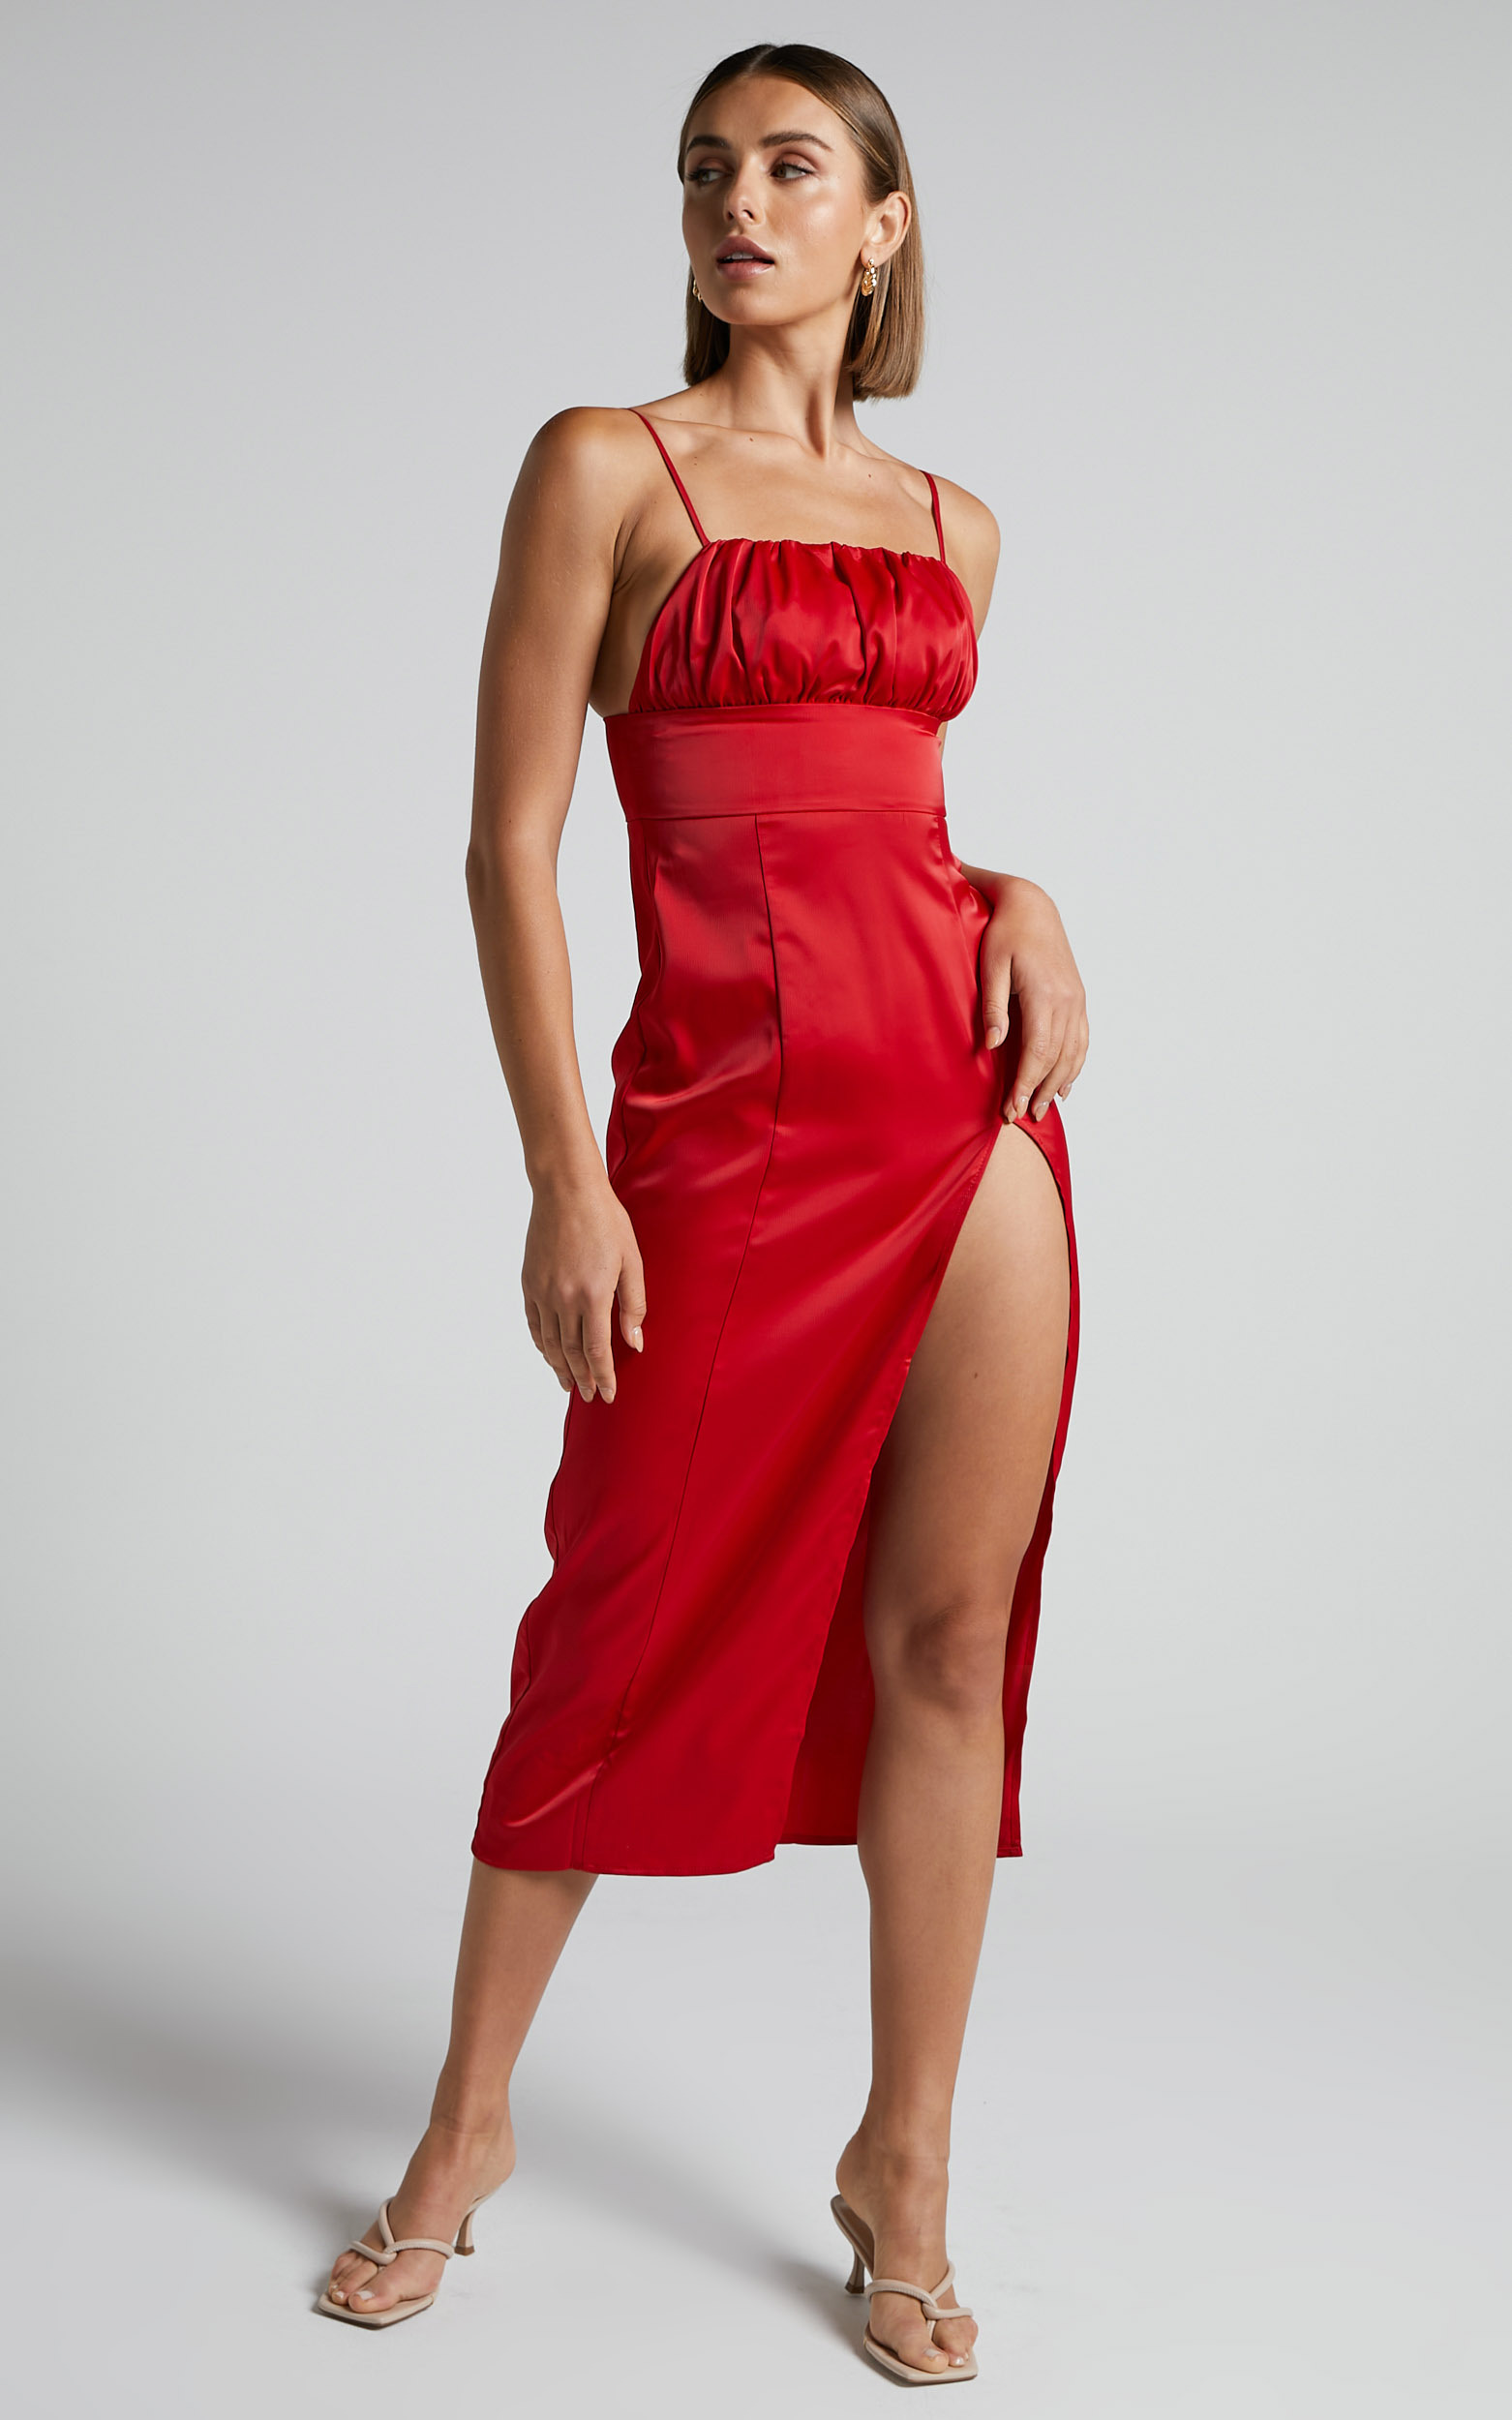 Wallace Midi Dress - Ruched Bust Thigh Split Dress in Red - 04, RED1, hi-res image number null